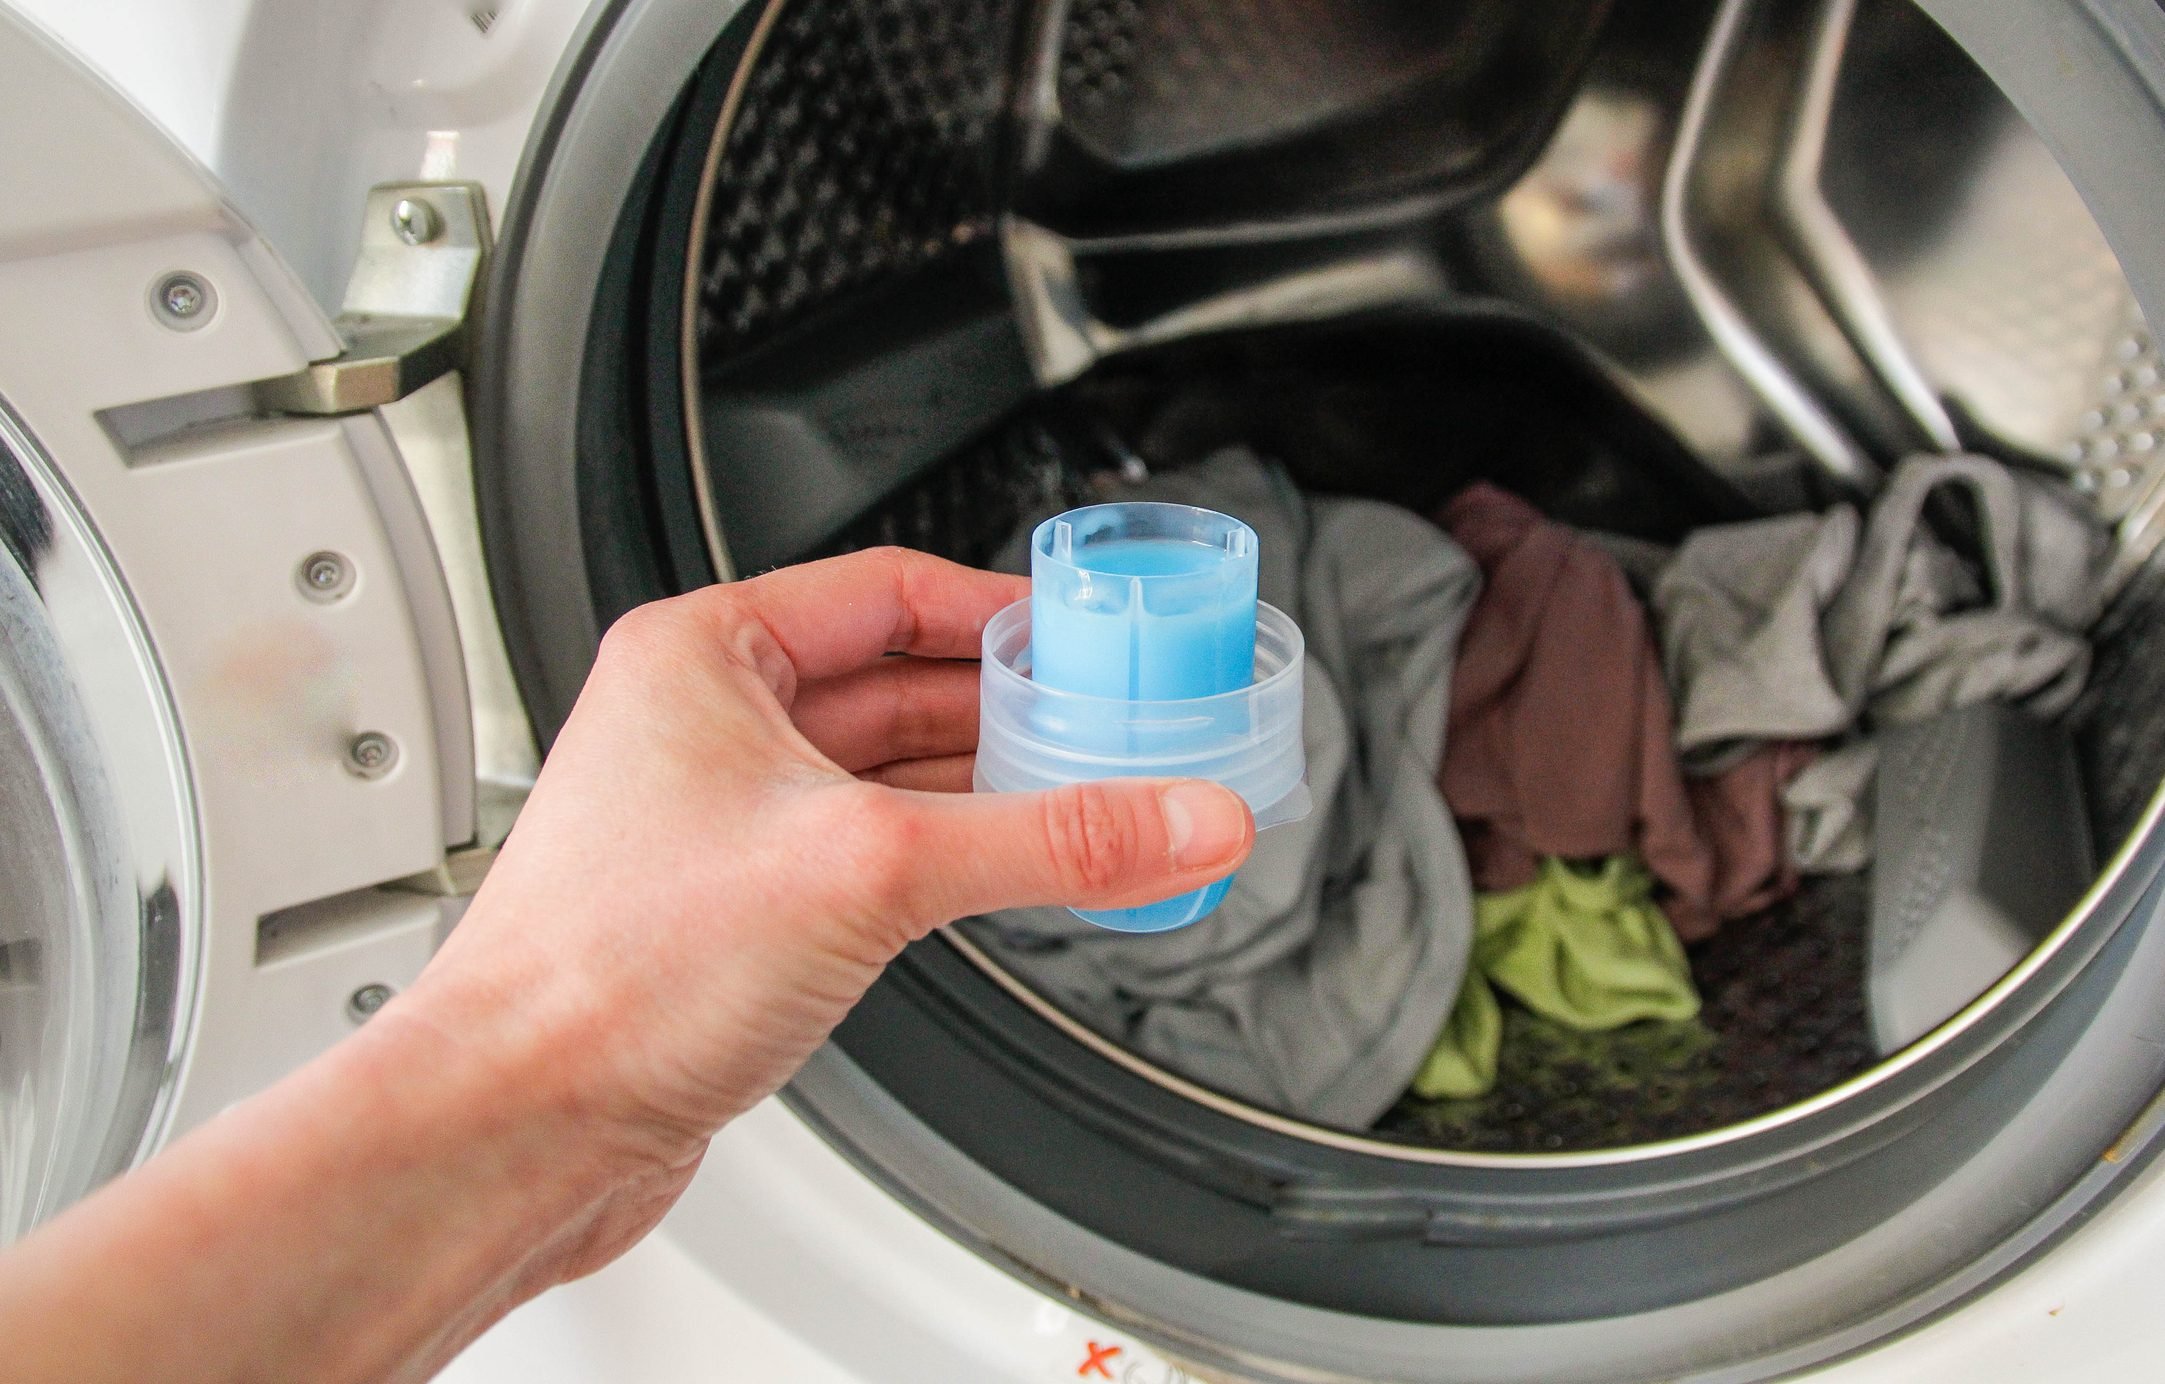 The world's smallest ultra-light washing machine for travel.